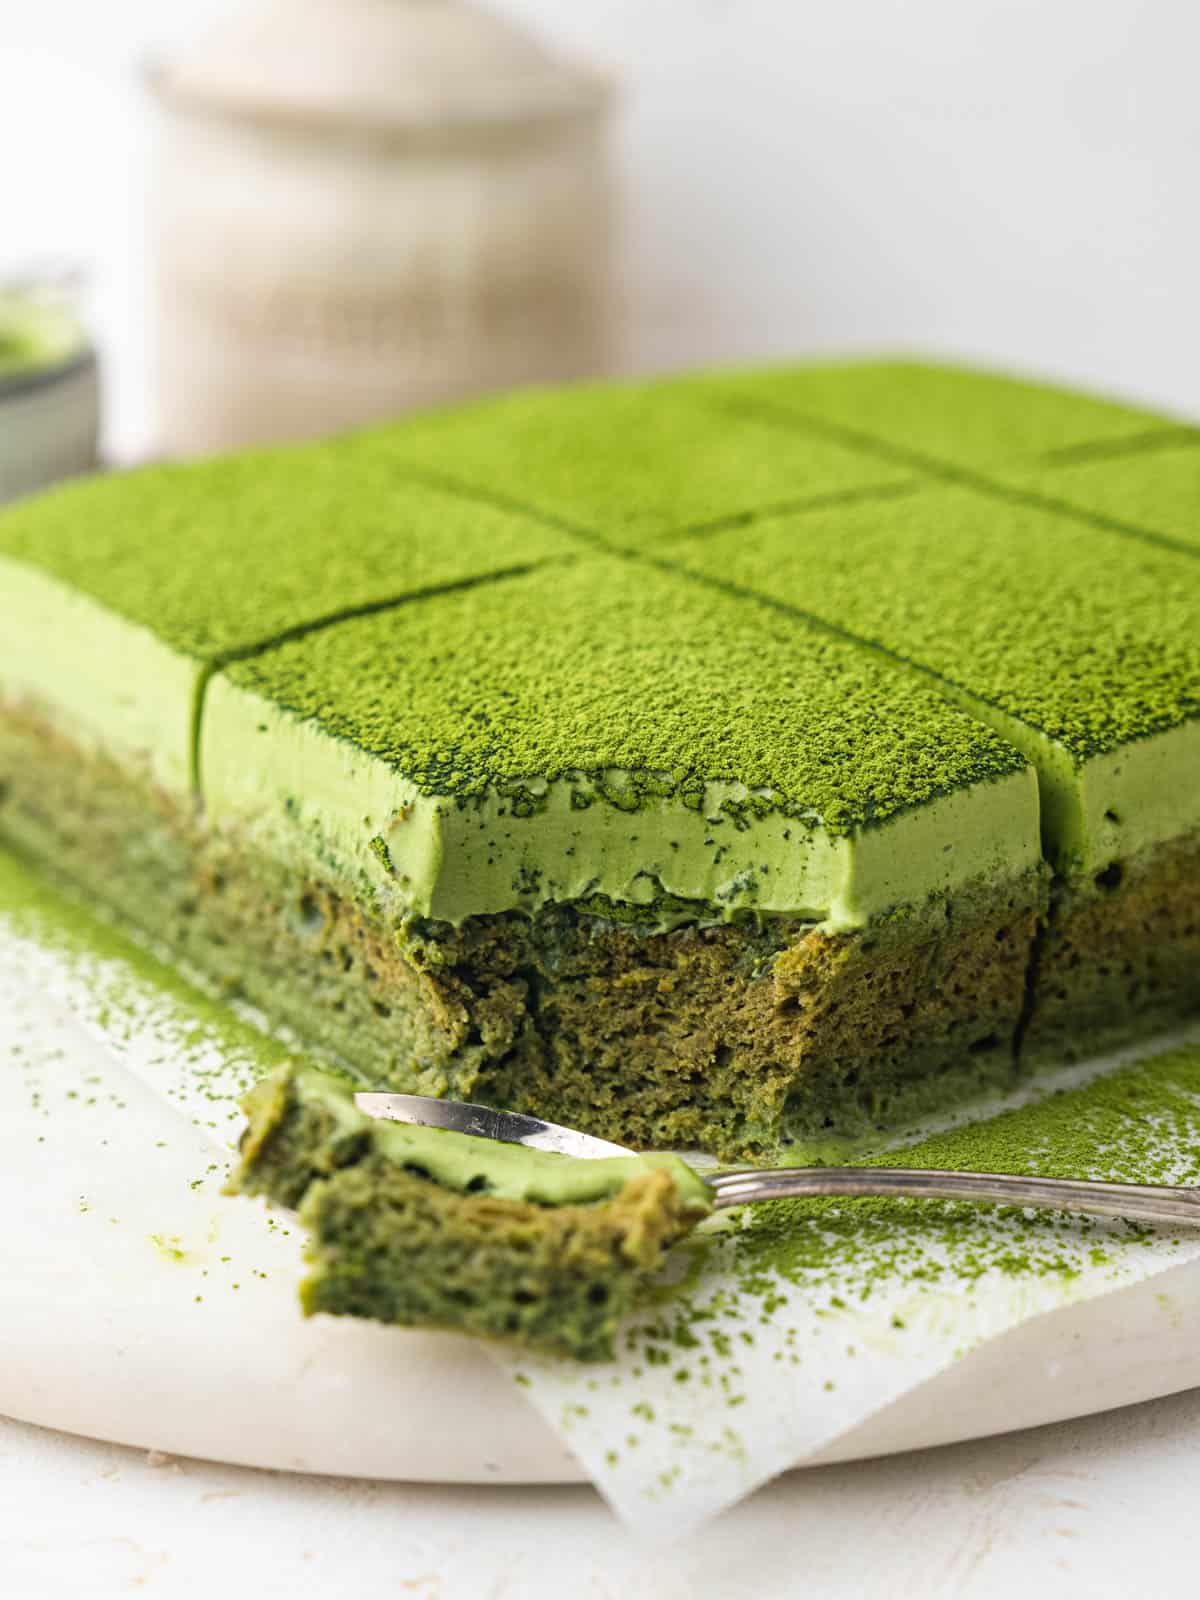 matcha tres leches cake topped with whipped cream and green tea powder